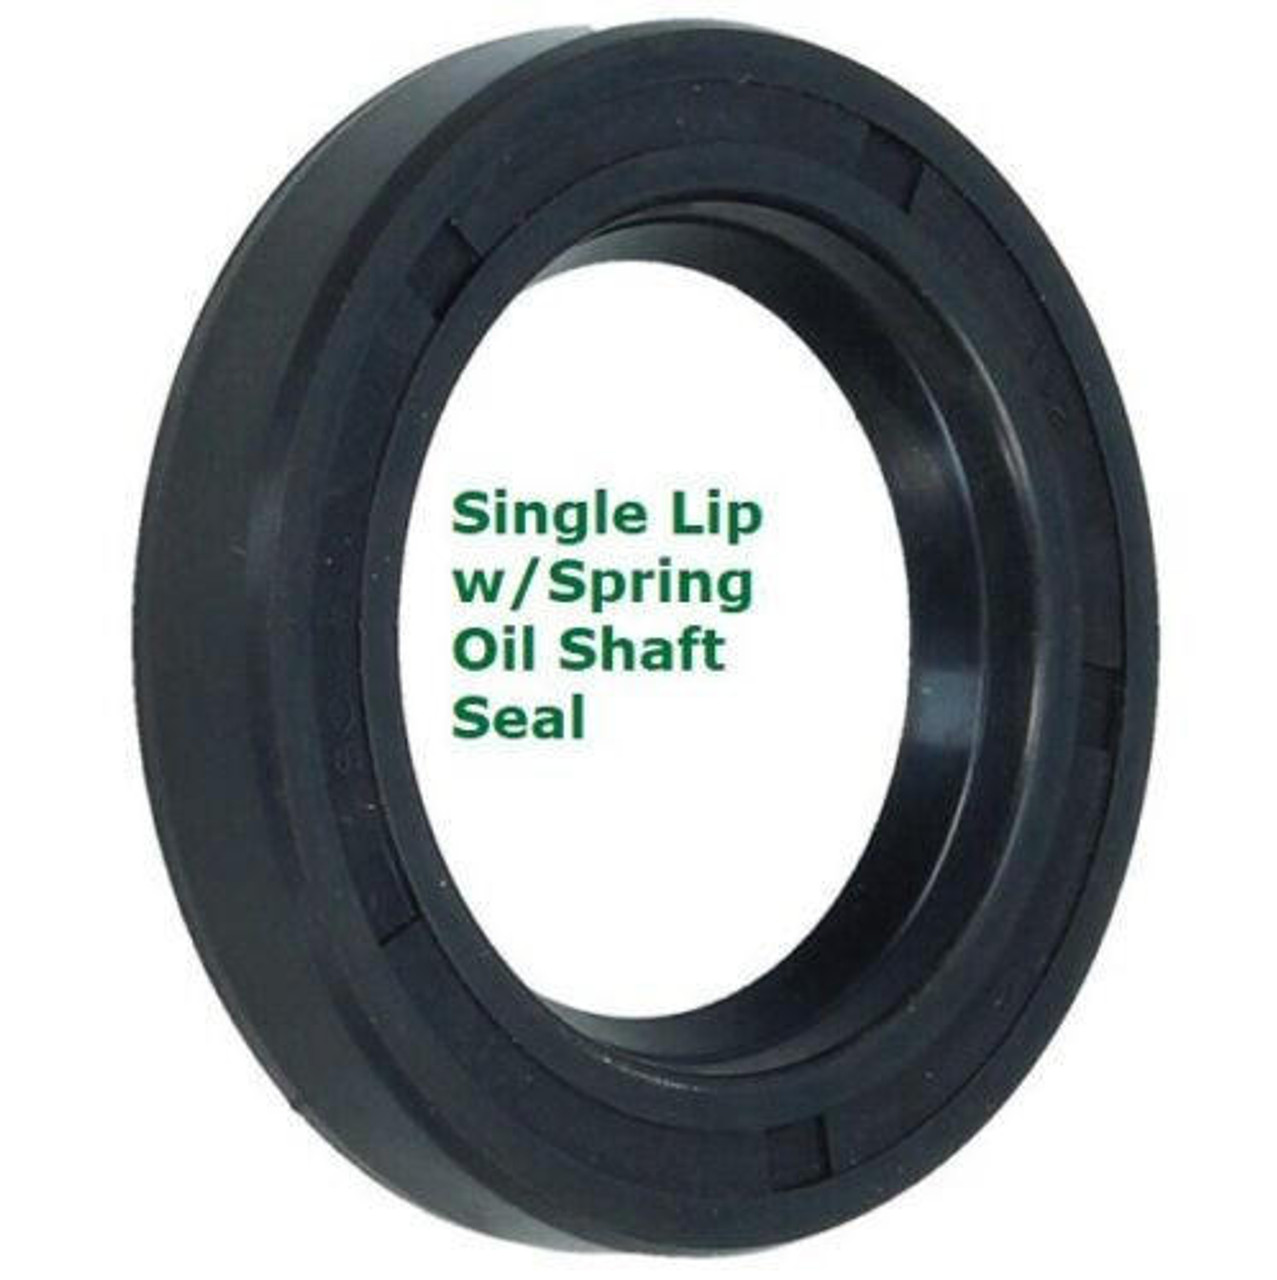 Metric Oil Shaft Seal 48 x 80 x 13mm   Price for 1 pc